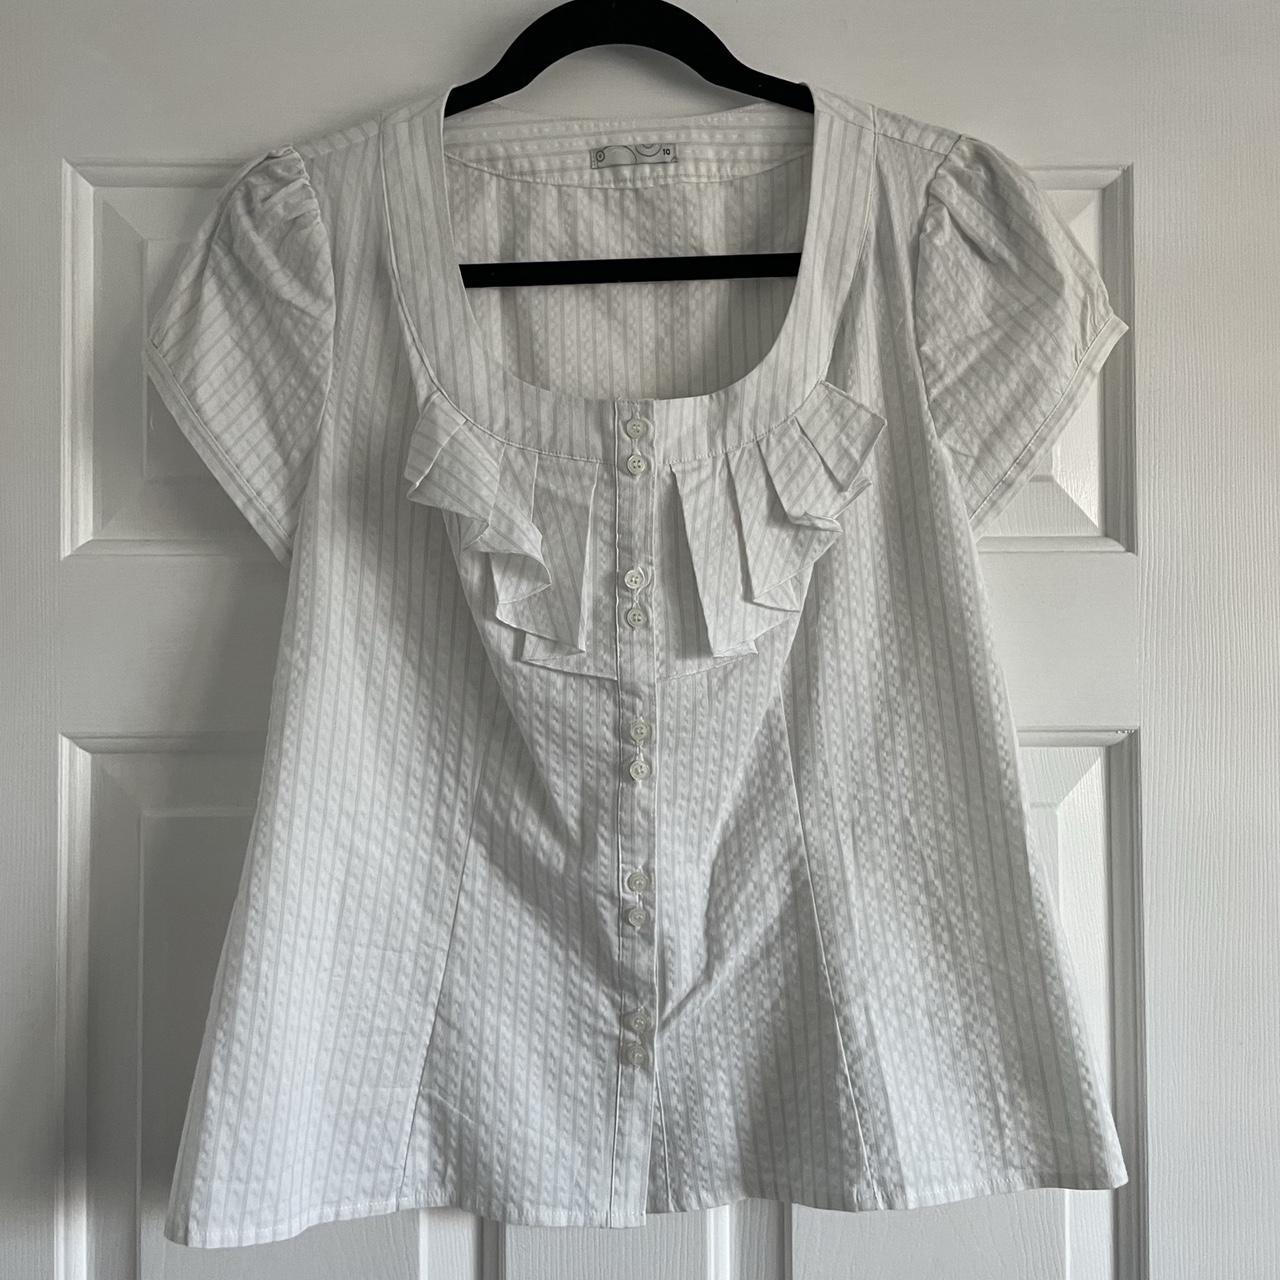 Vintage target white and light strips button down... - Depop